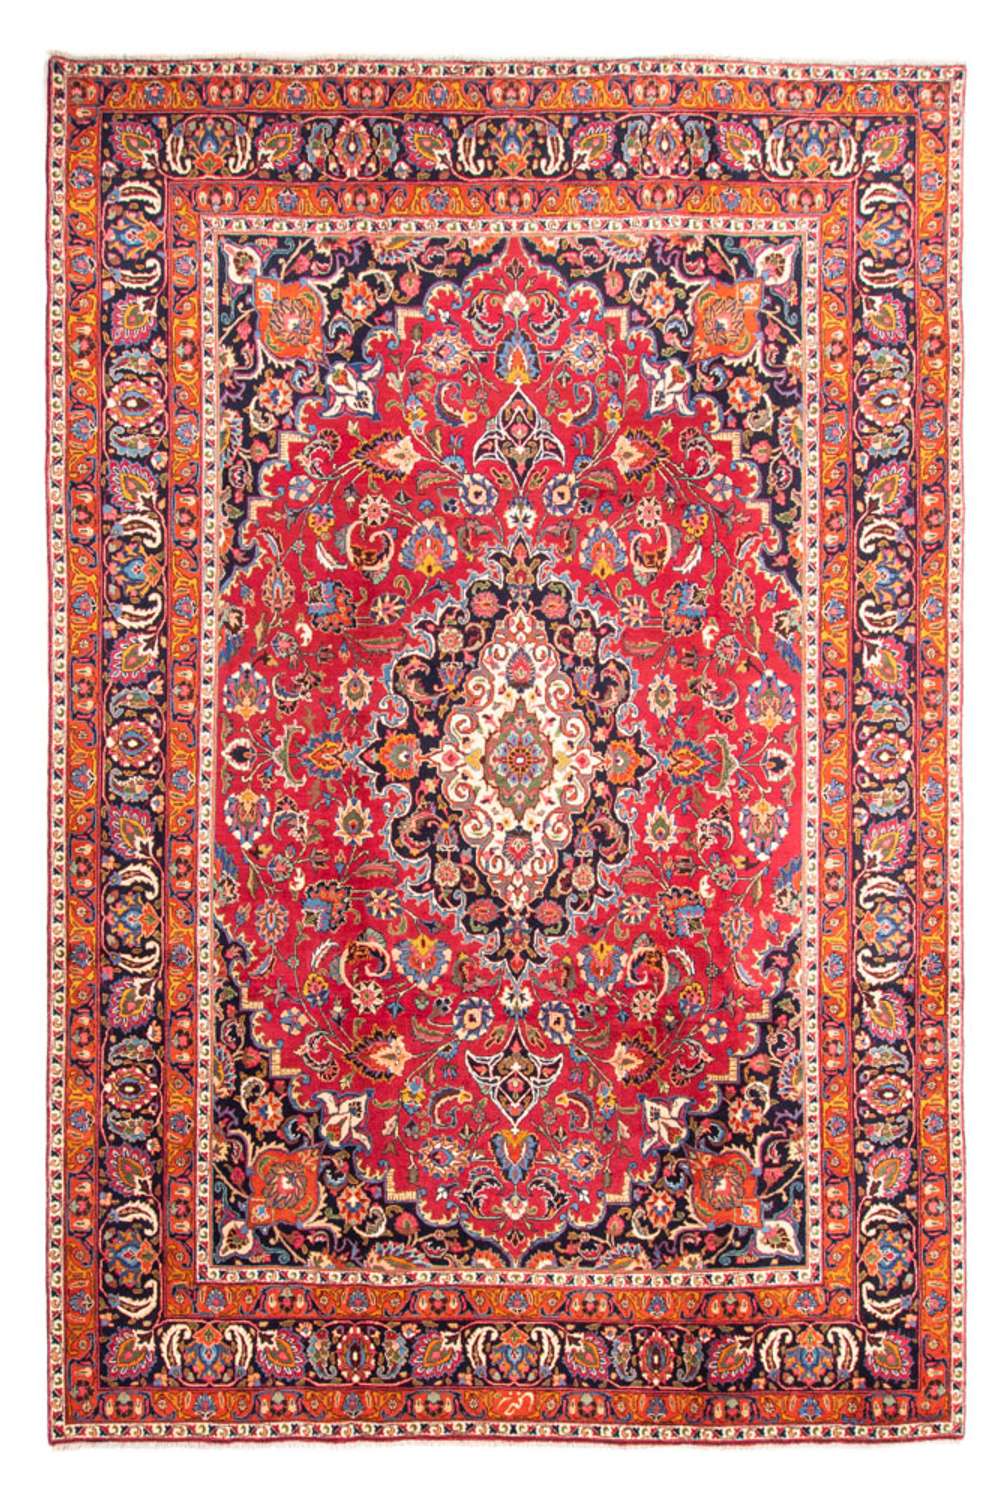 Perser Rug - Classic - 355 x 250 cm - red